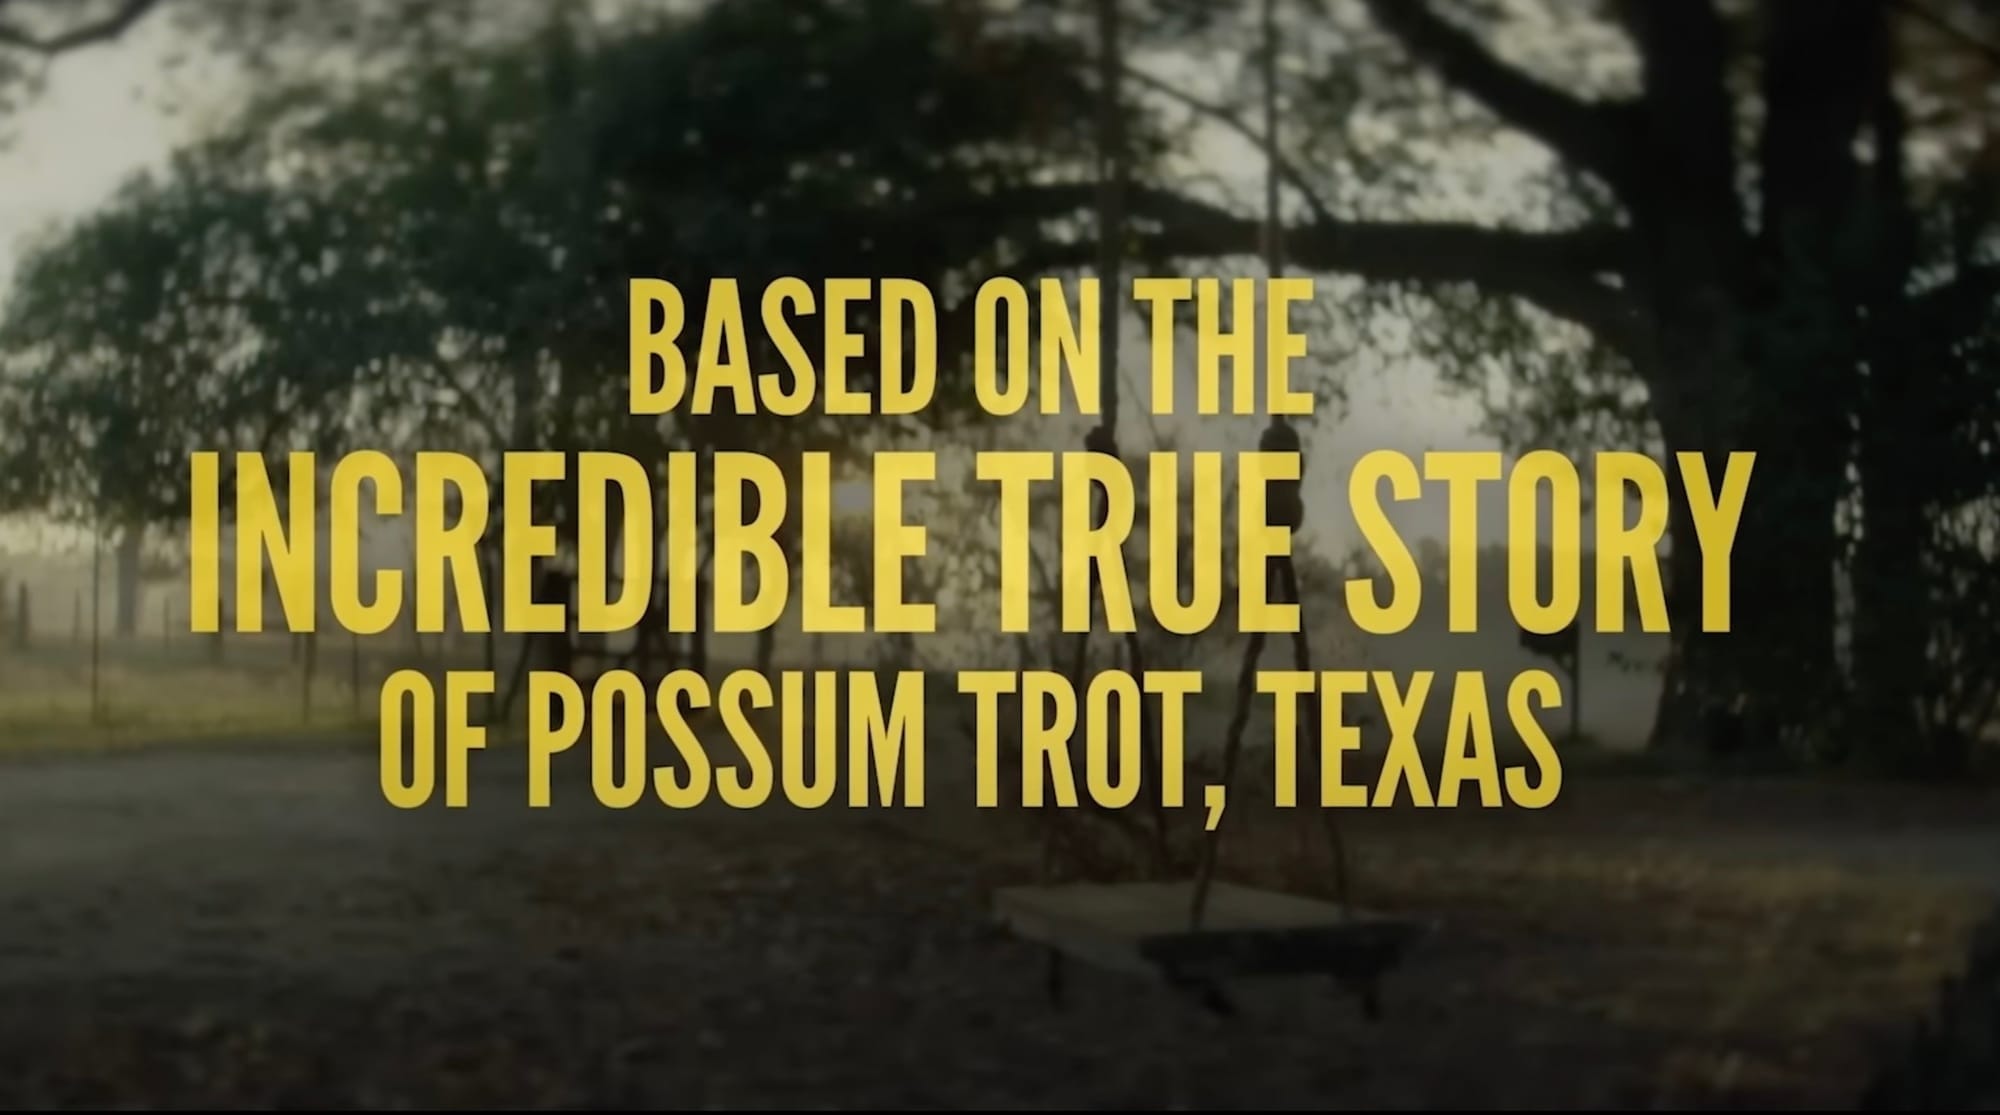 Possum Trot's "Carry You" Trailer Has The Kind of Gravitas Angel Needs